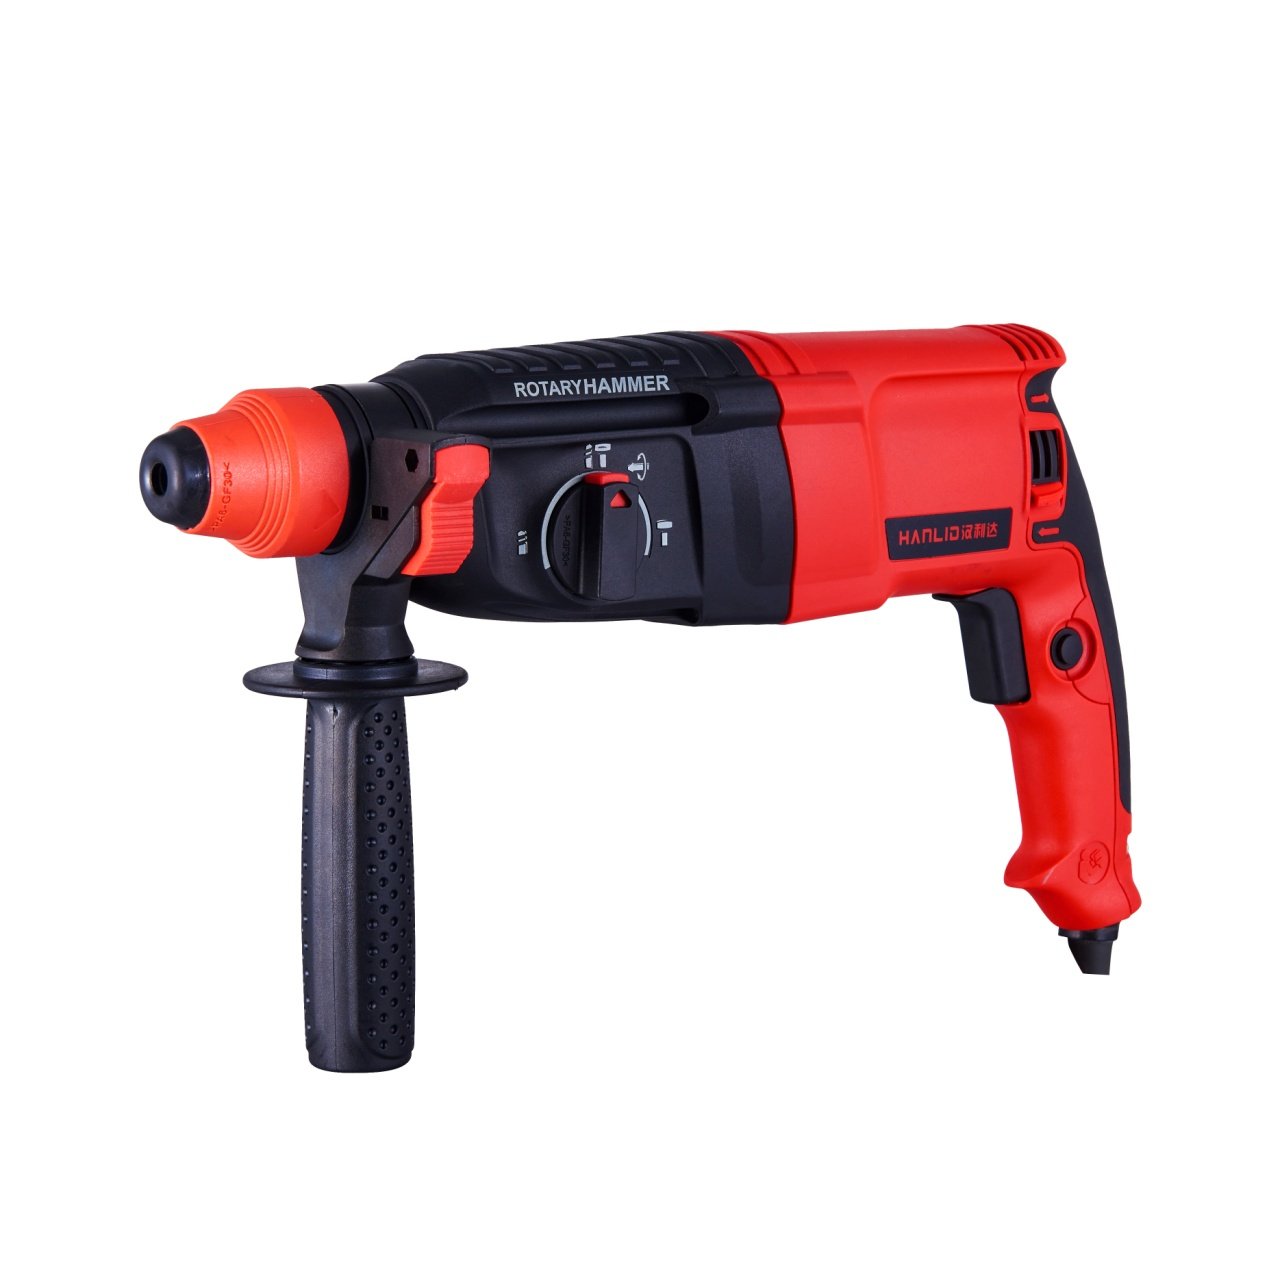 Electric drill power tool knowledge